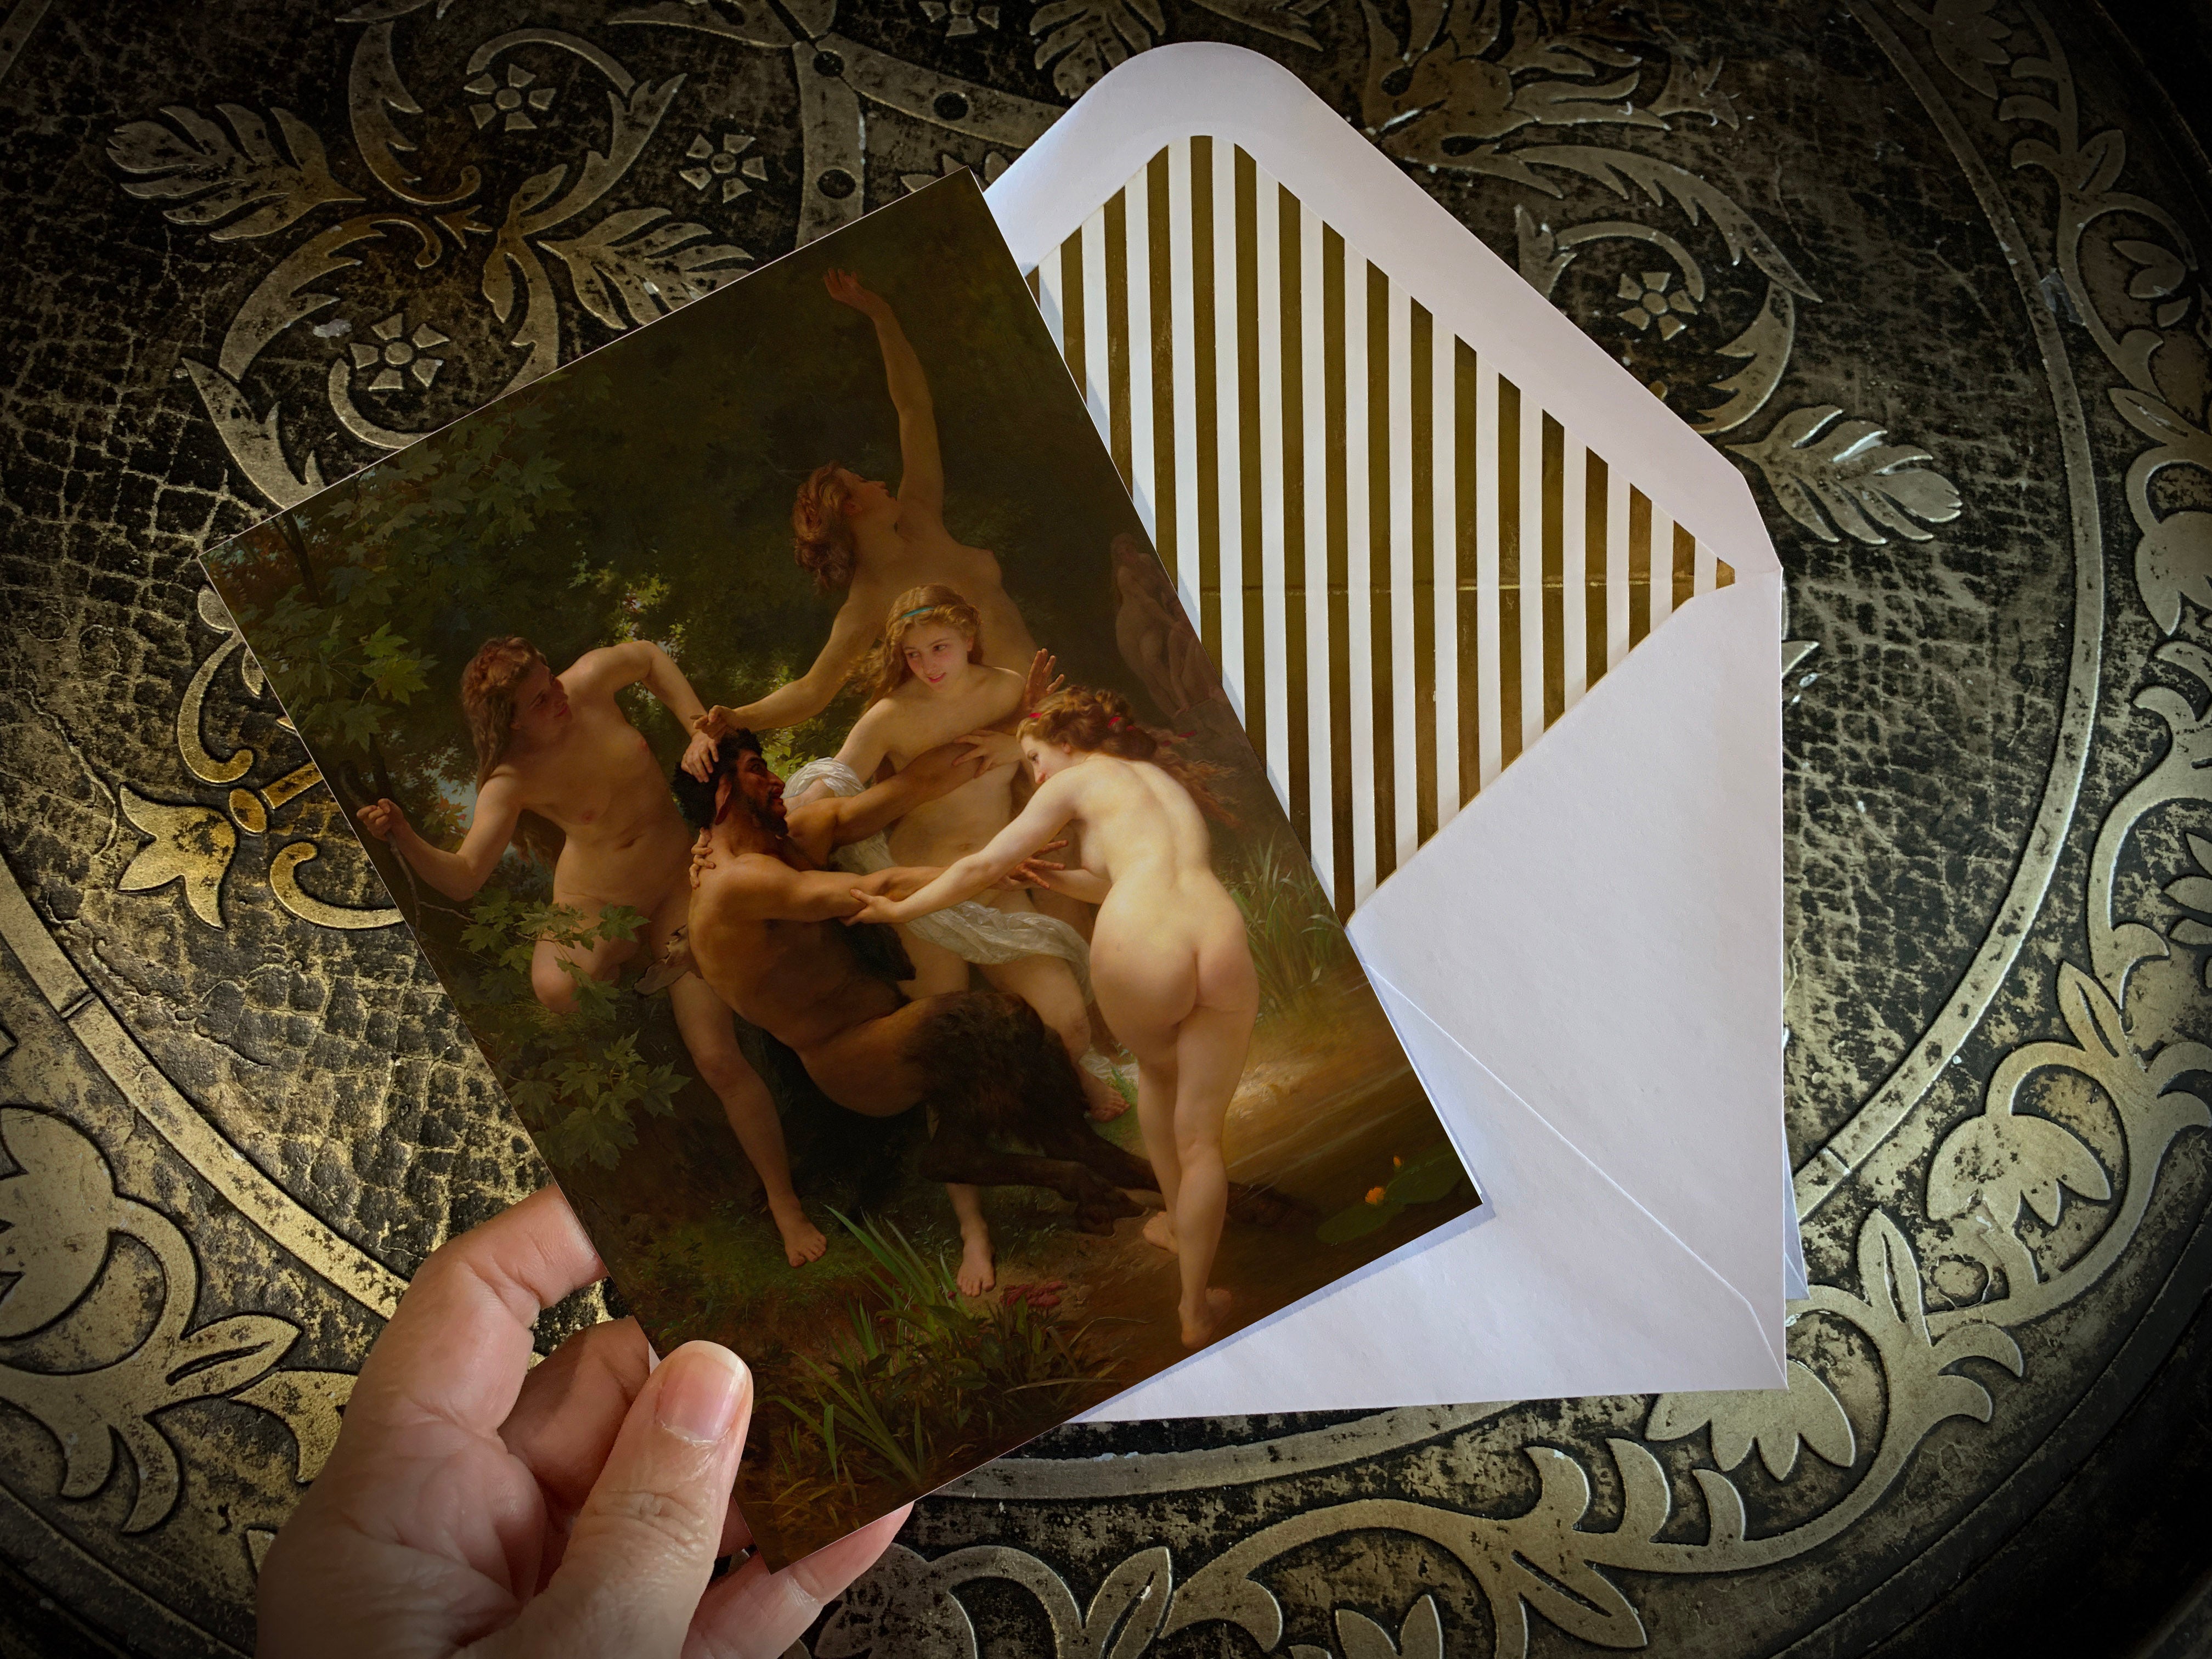 Nymph and Satyr, by Adolphe William Bouguereau, Greeting Card, with Elegant Gold Foil Envelope